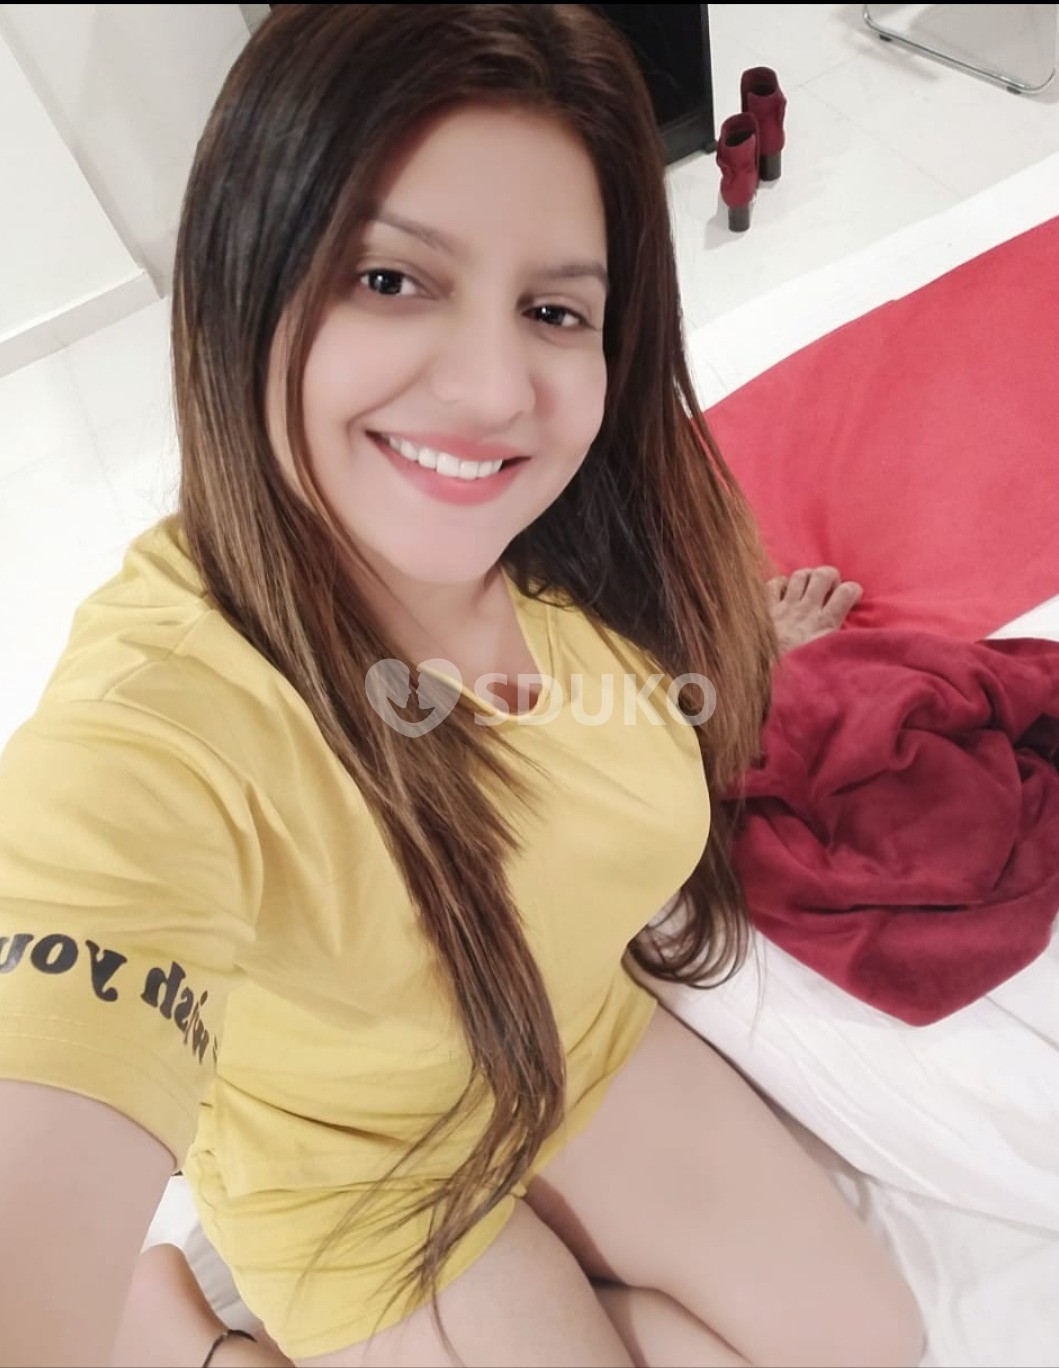 VIJAYANAGAR hot 💋👅 VIP model available Anytime sex available ANAL ORAL 24 X 7 HRS